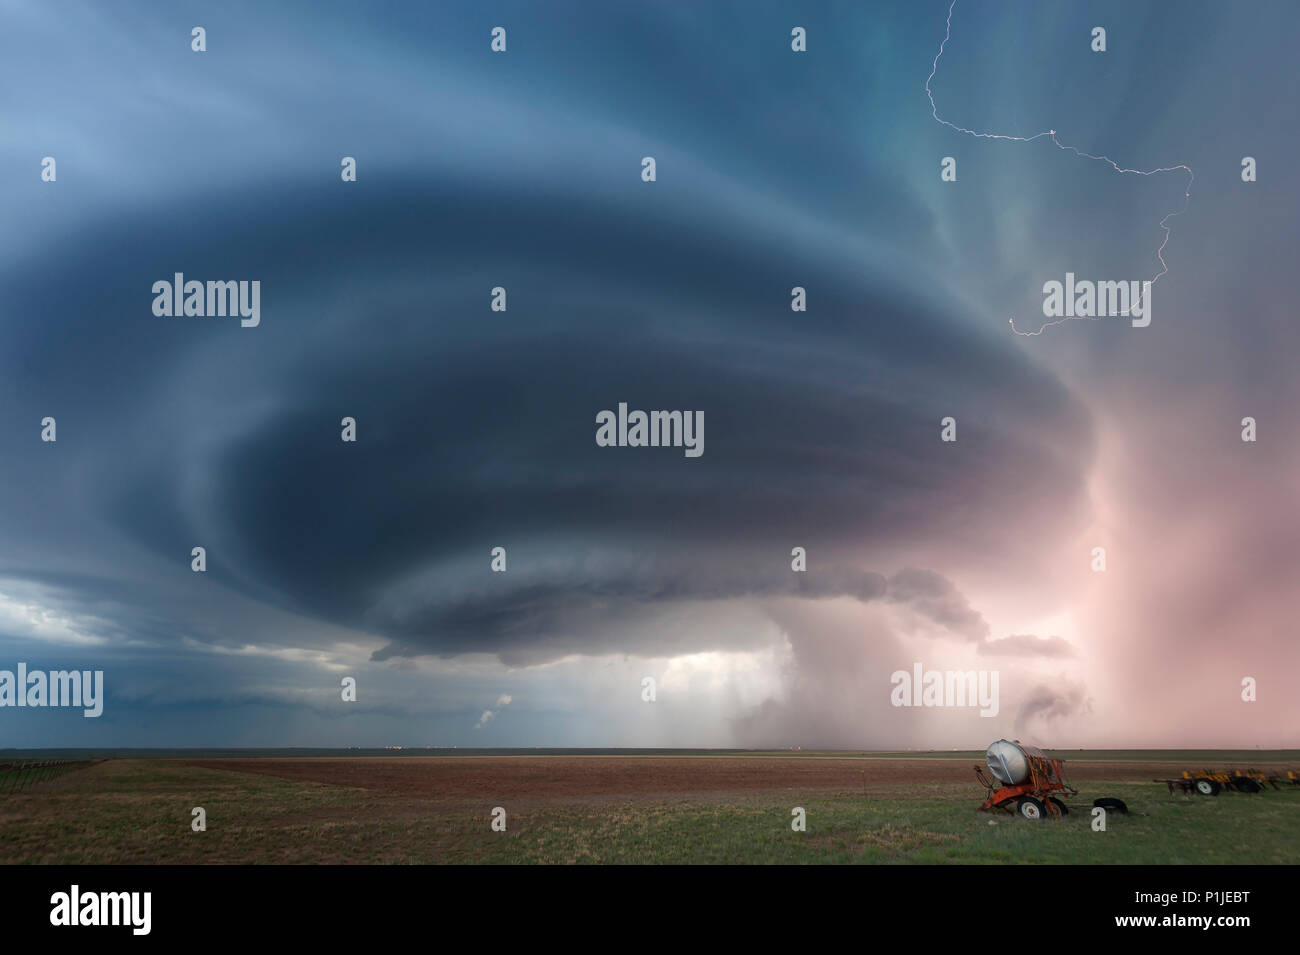 Supercell with cloud-to-cloud and sheet lightning above a field with agricultural machines near Vega, Oldham County, Texas, USA Stock Photo